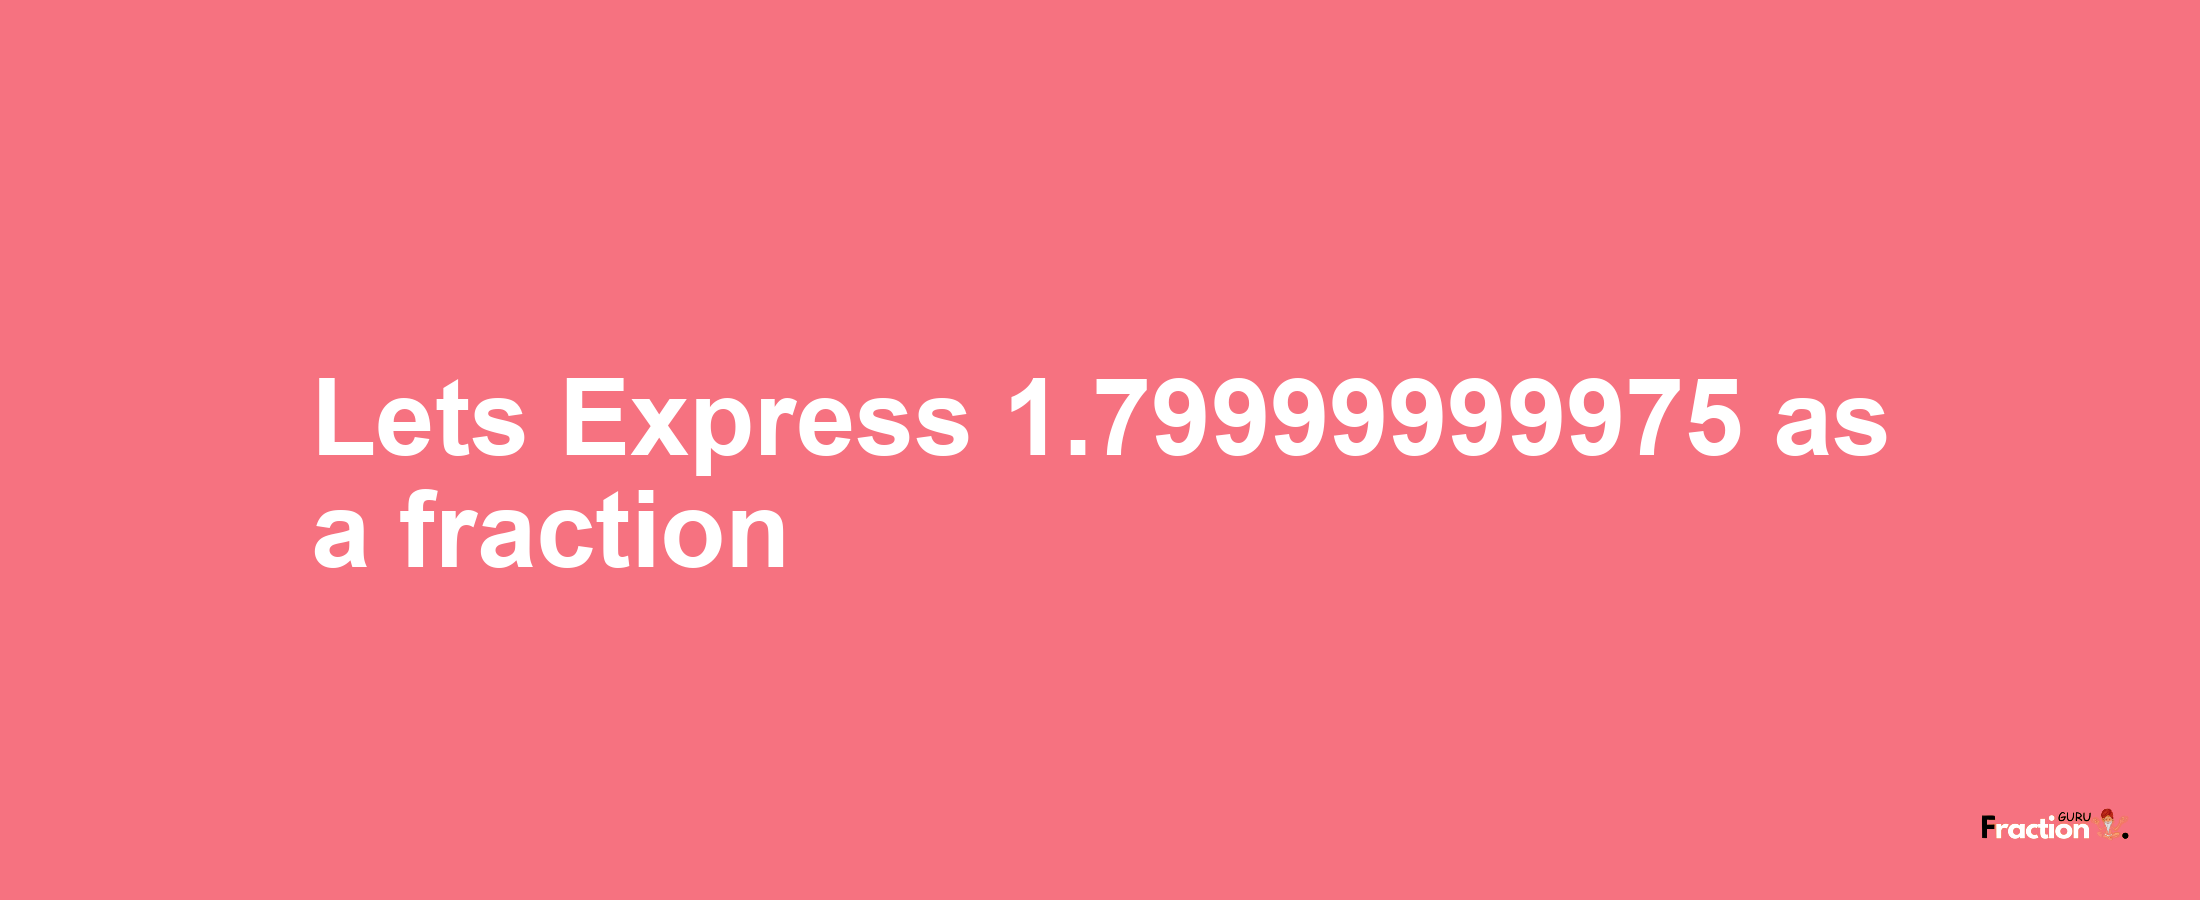 Lets Express 1.79999999975 as afraction